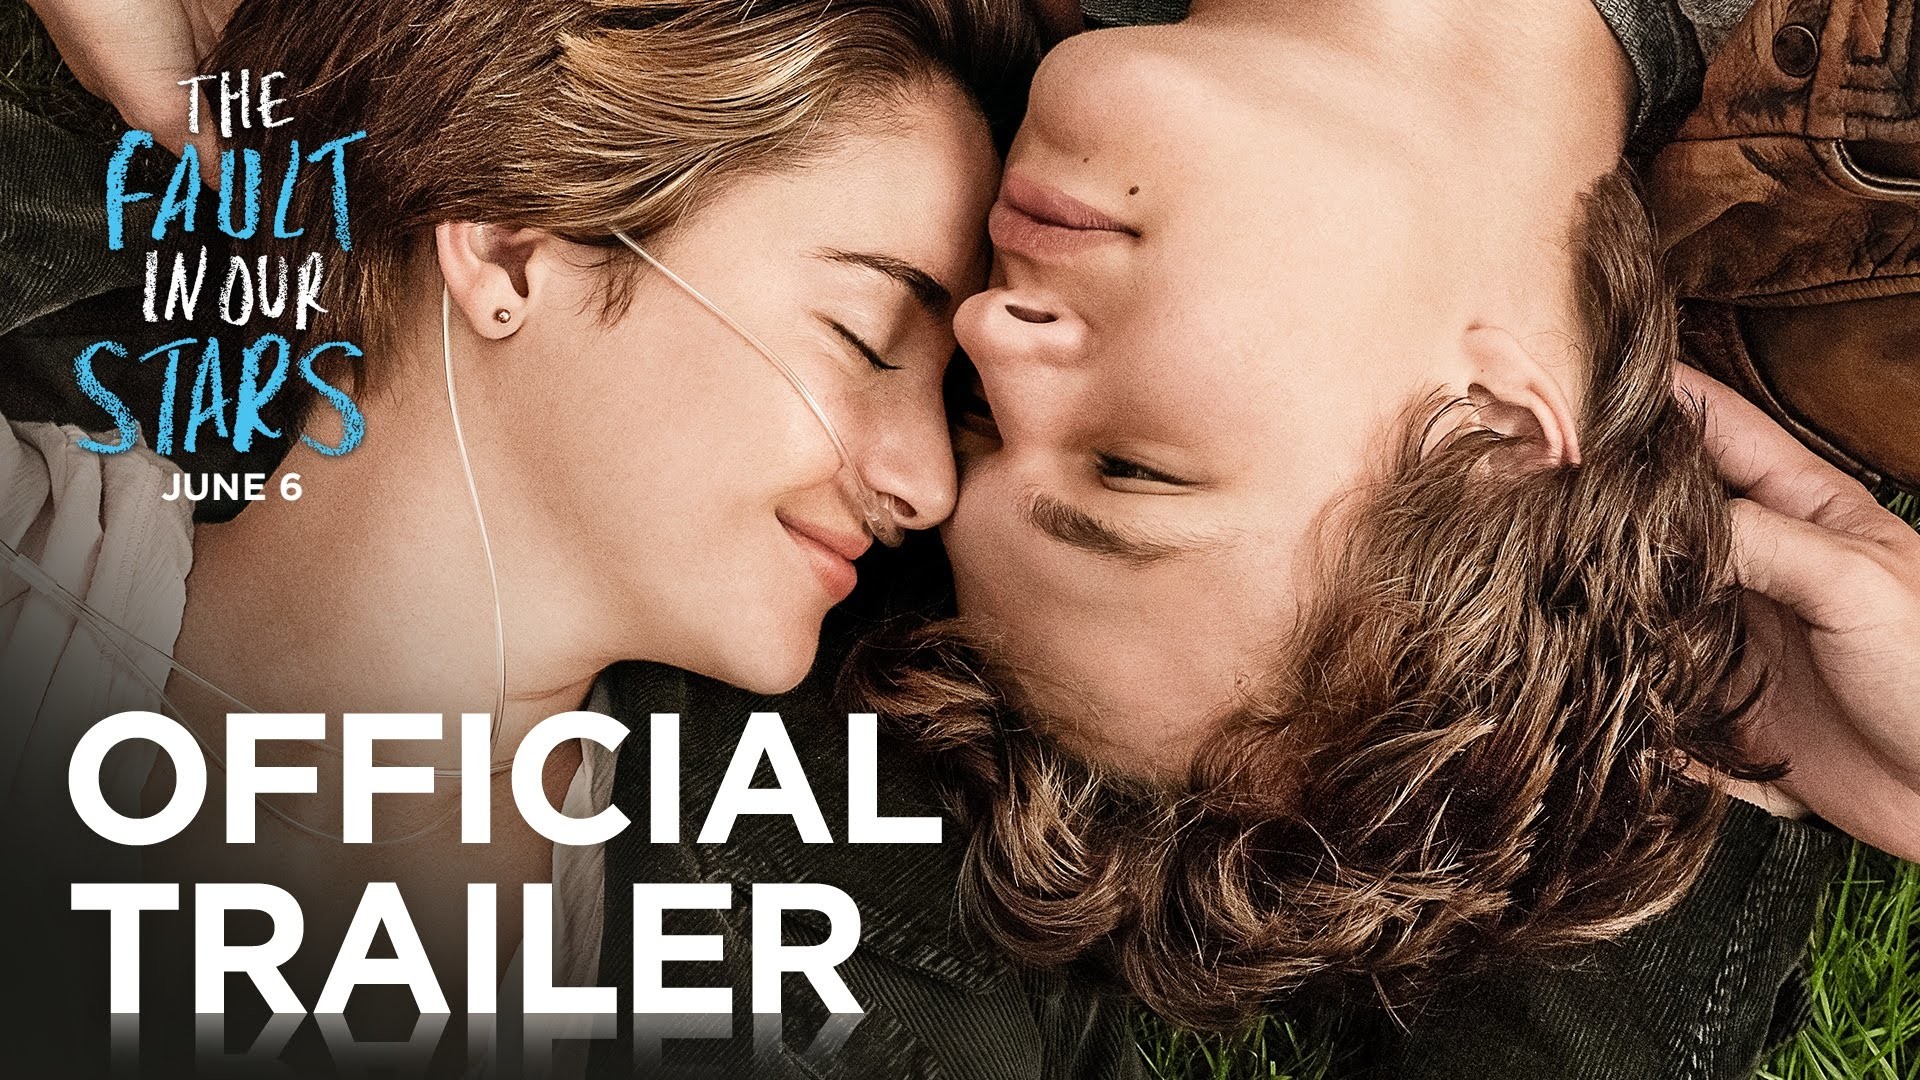 1920x1080 The Fault In Our Stars | Official Trailer [HD] | 20th Century FOX - YouTube